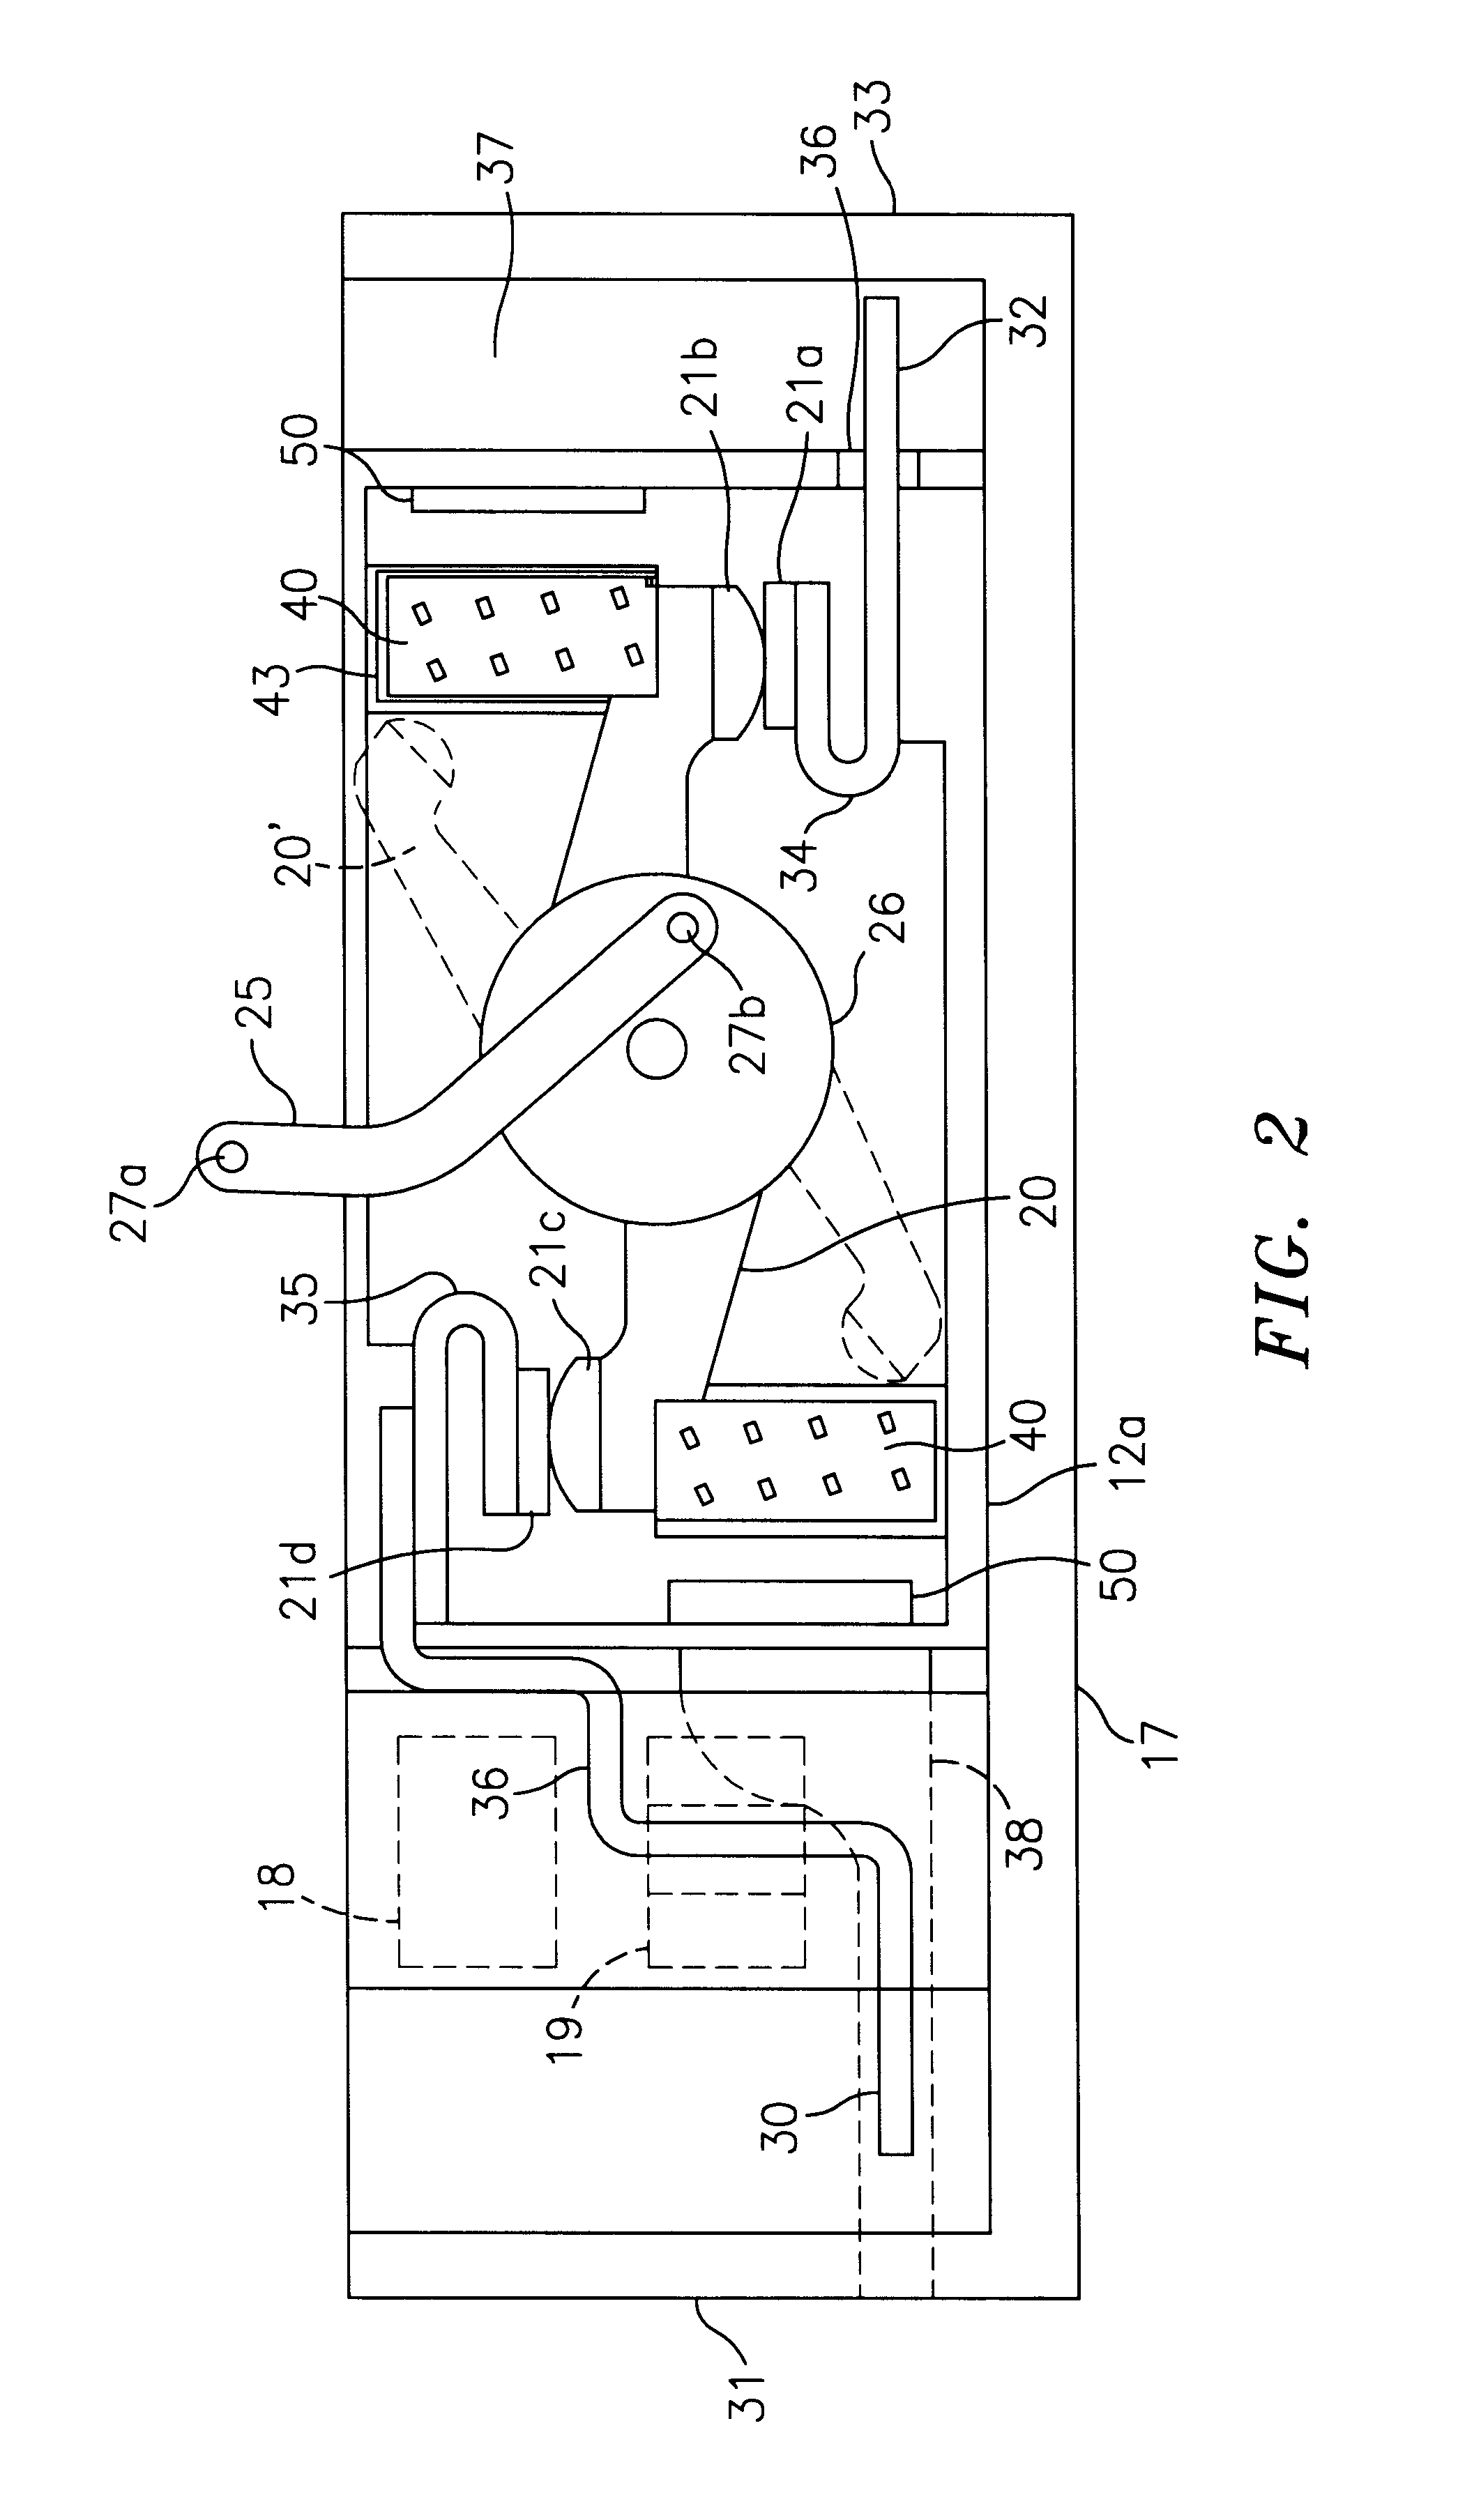 Circuit breaker arc exhaust baffle with variable aperture